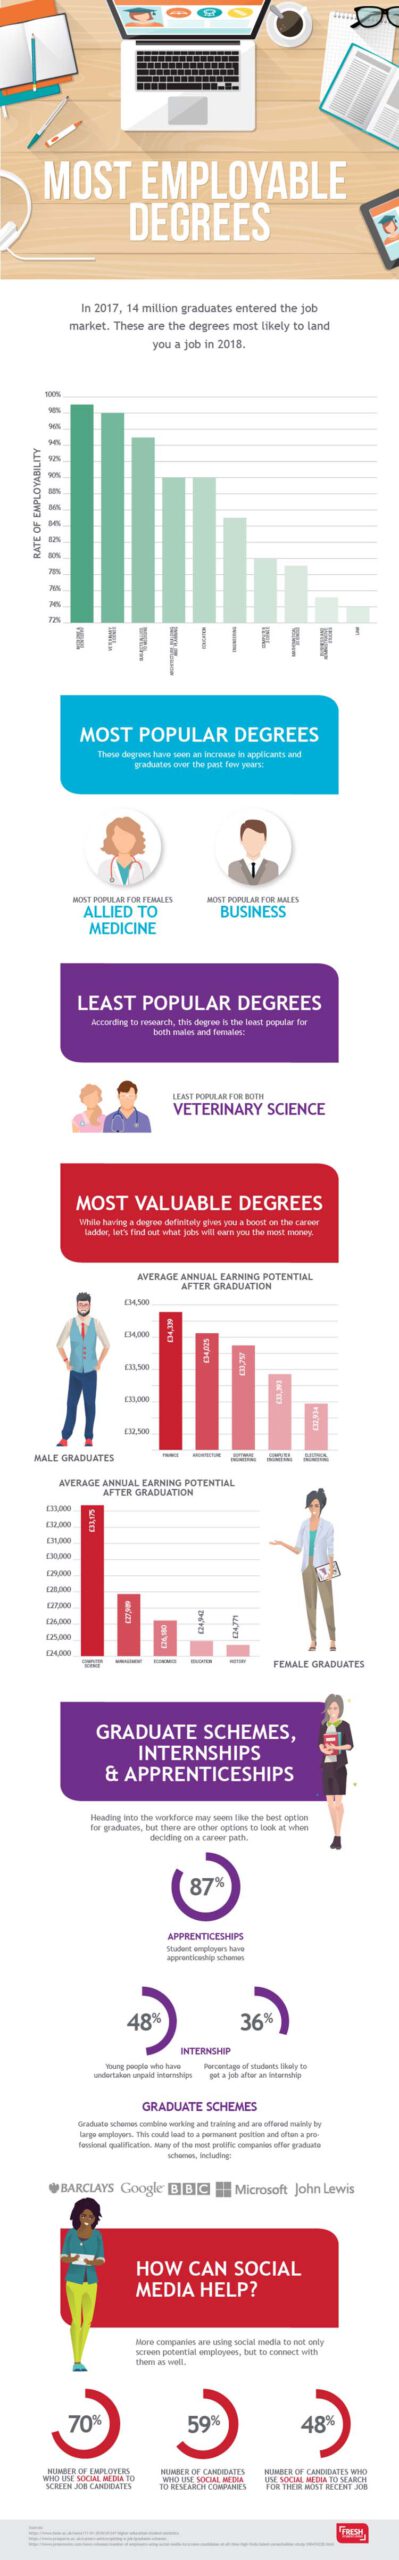 Most Employable Degree Infographic